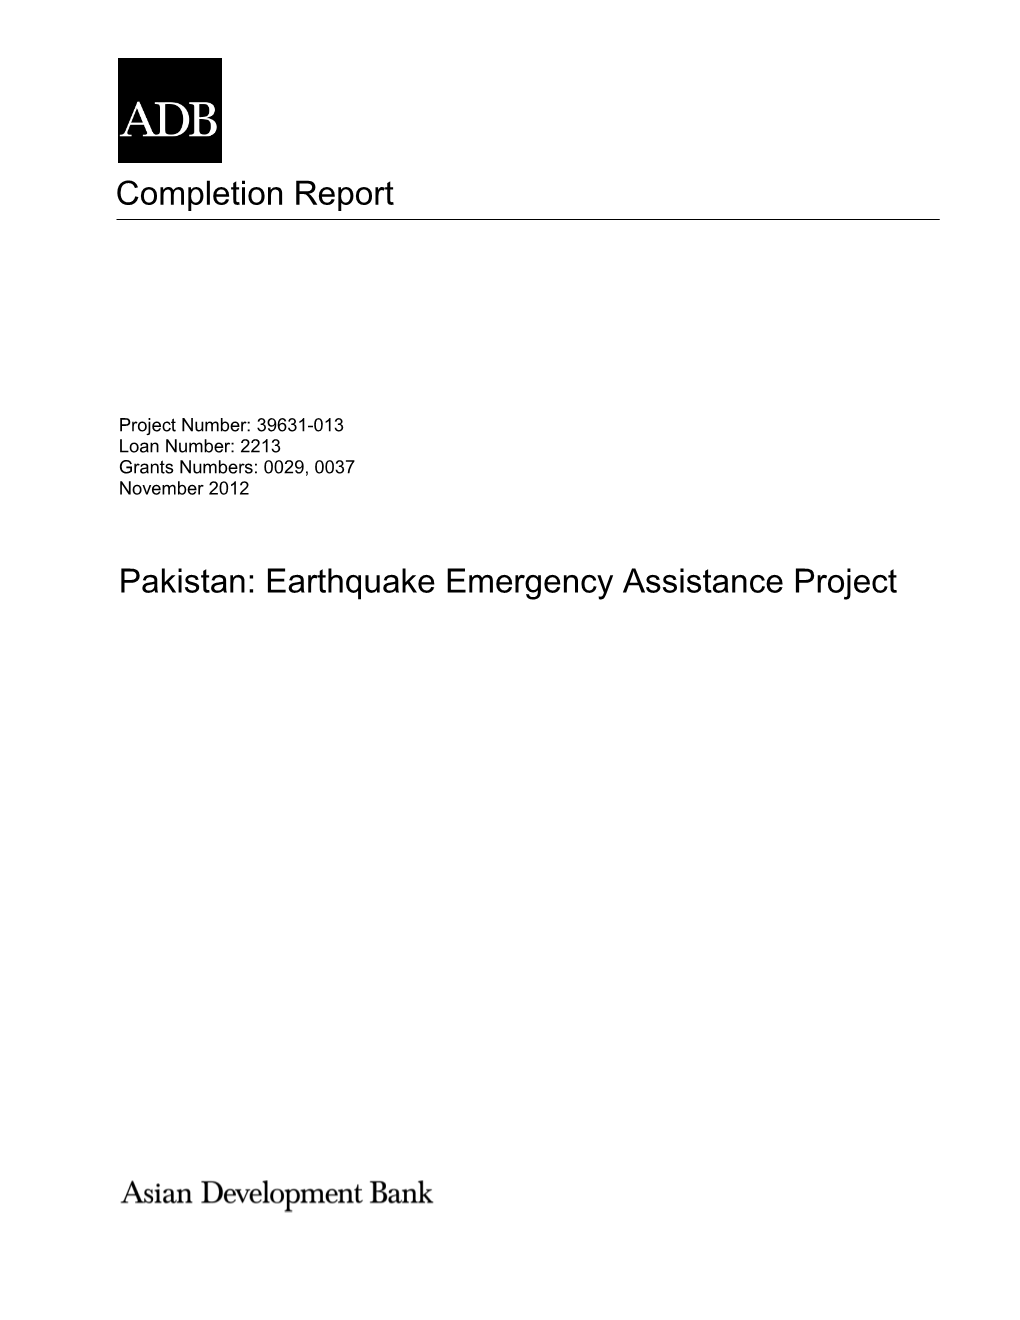 Earthquake Emergency Assistance Project